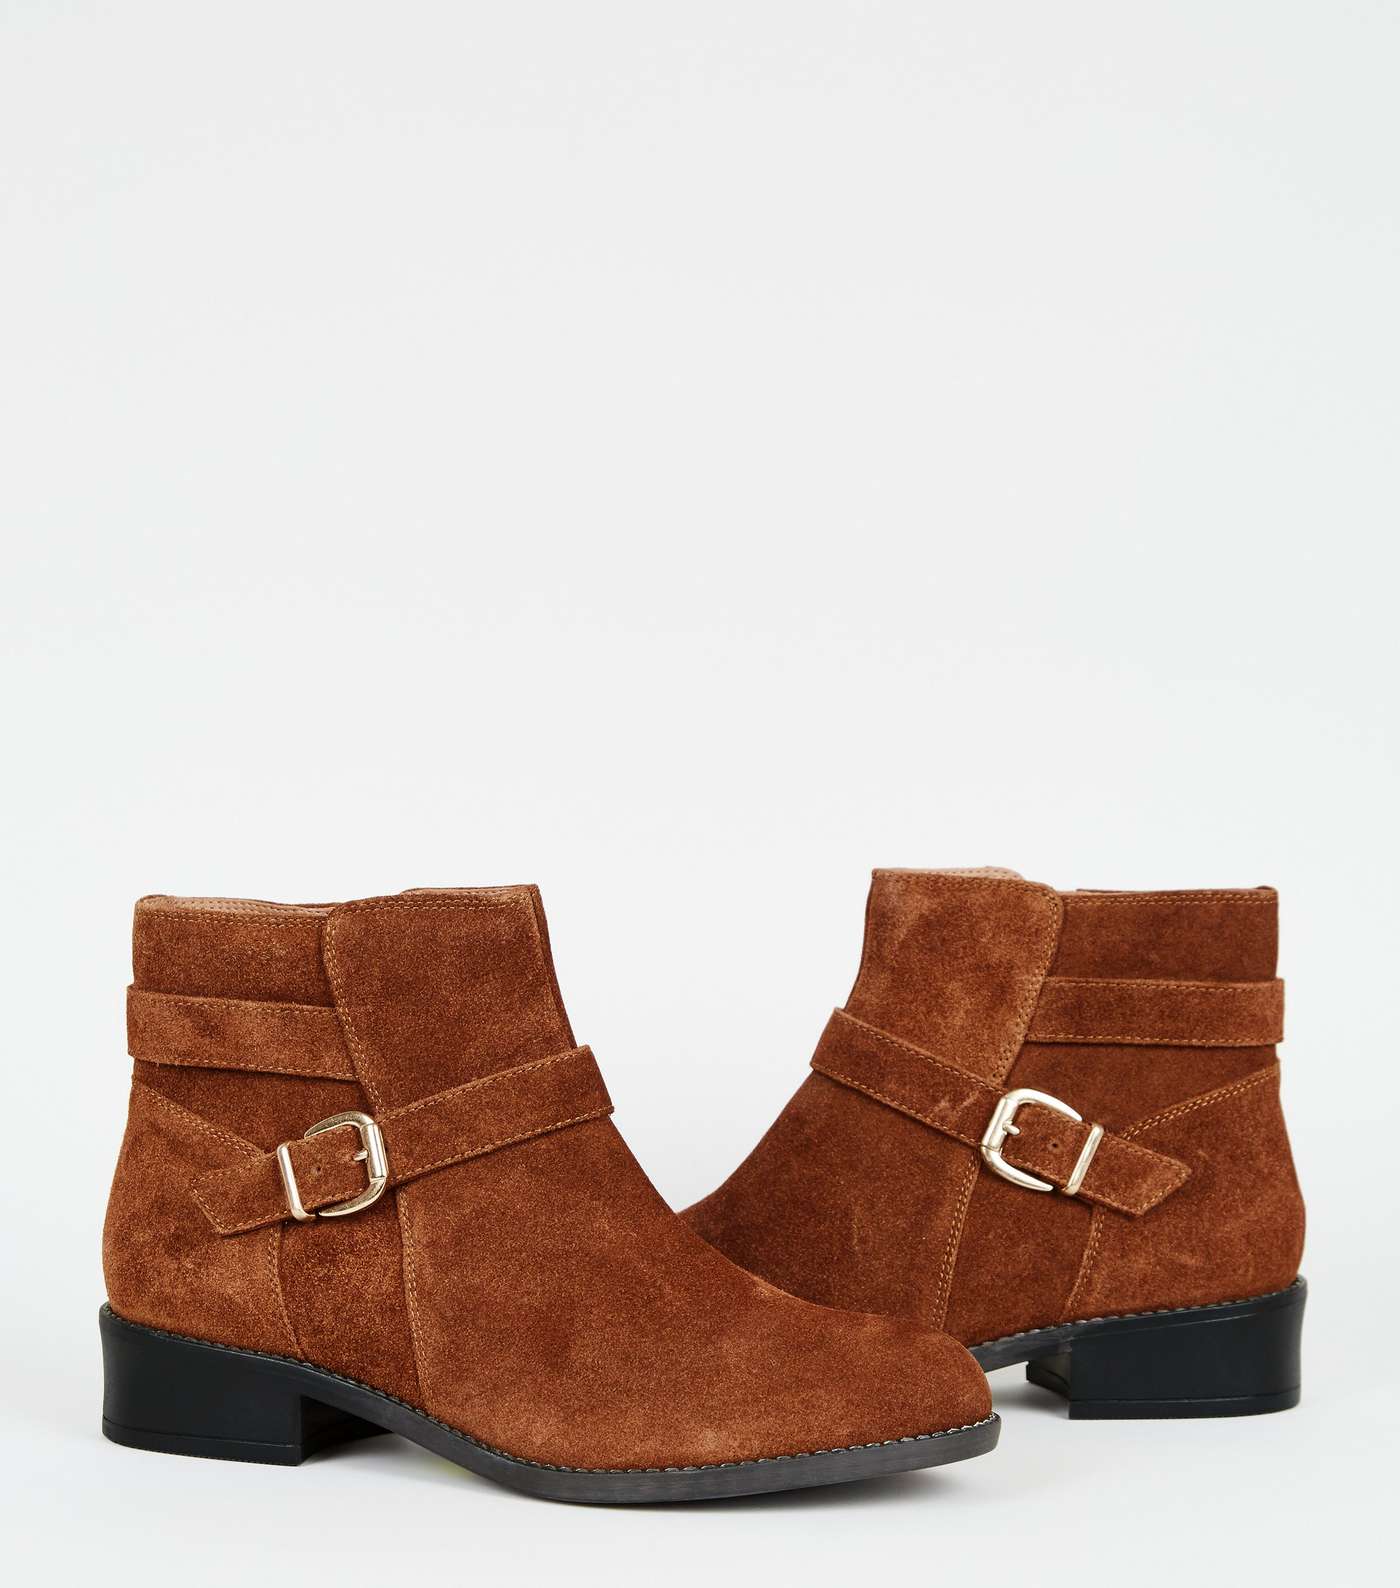 Wide Fit Tan Suede Buckle Strap Boots Image 3